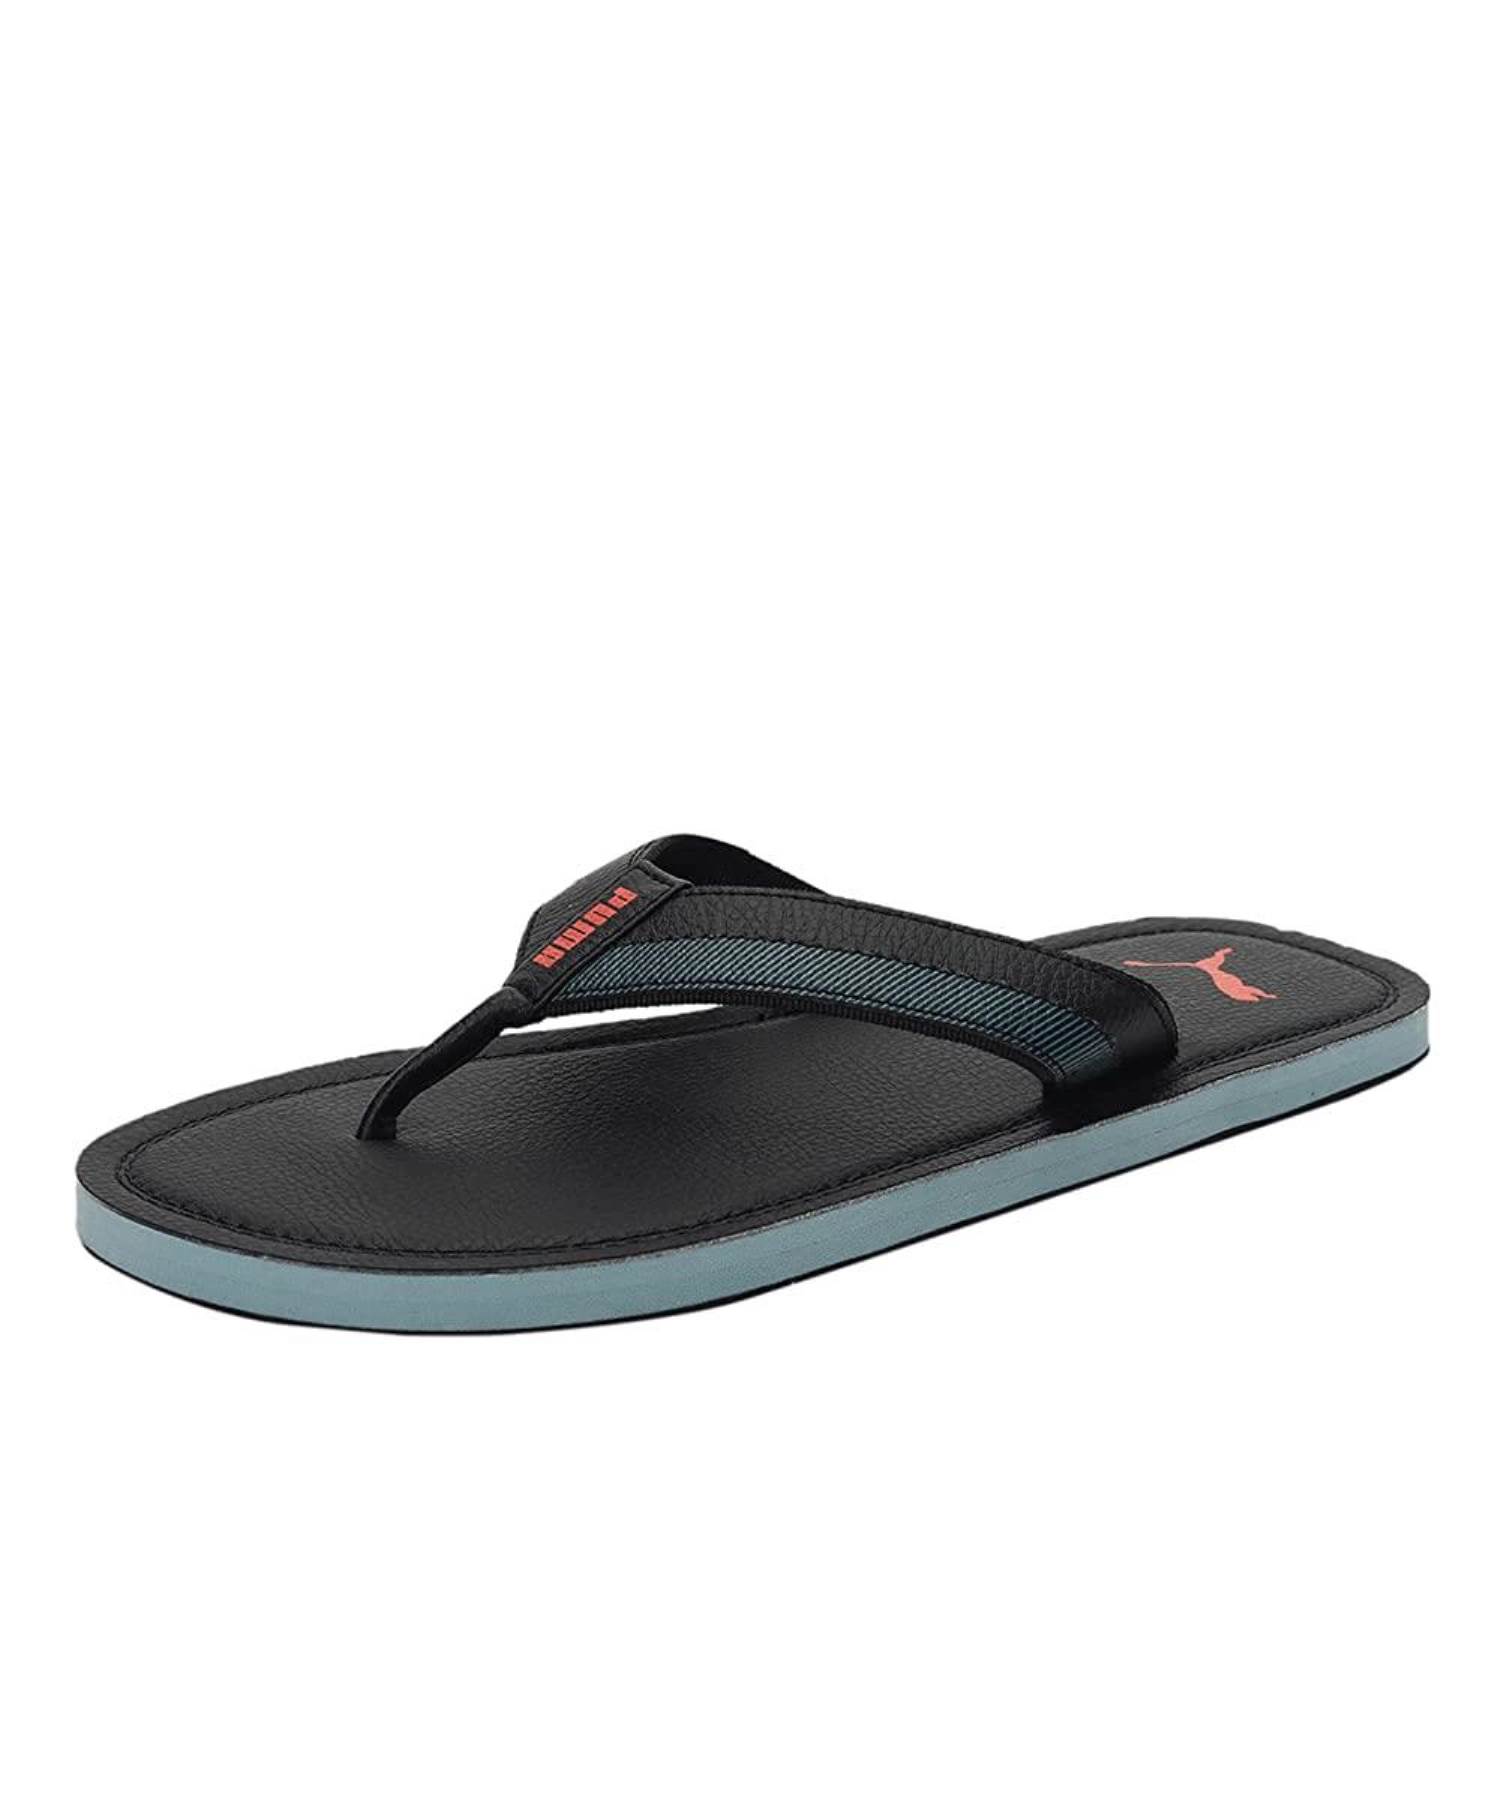 Puma Slides in Surulere for sale ▷ Prices on Jiji.ng